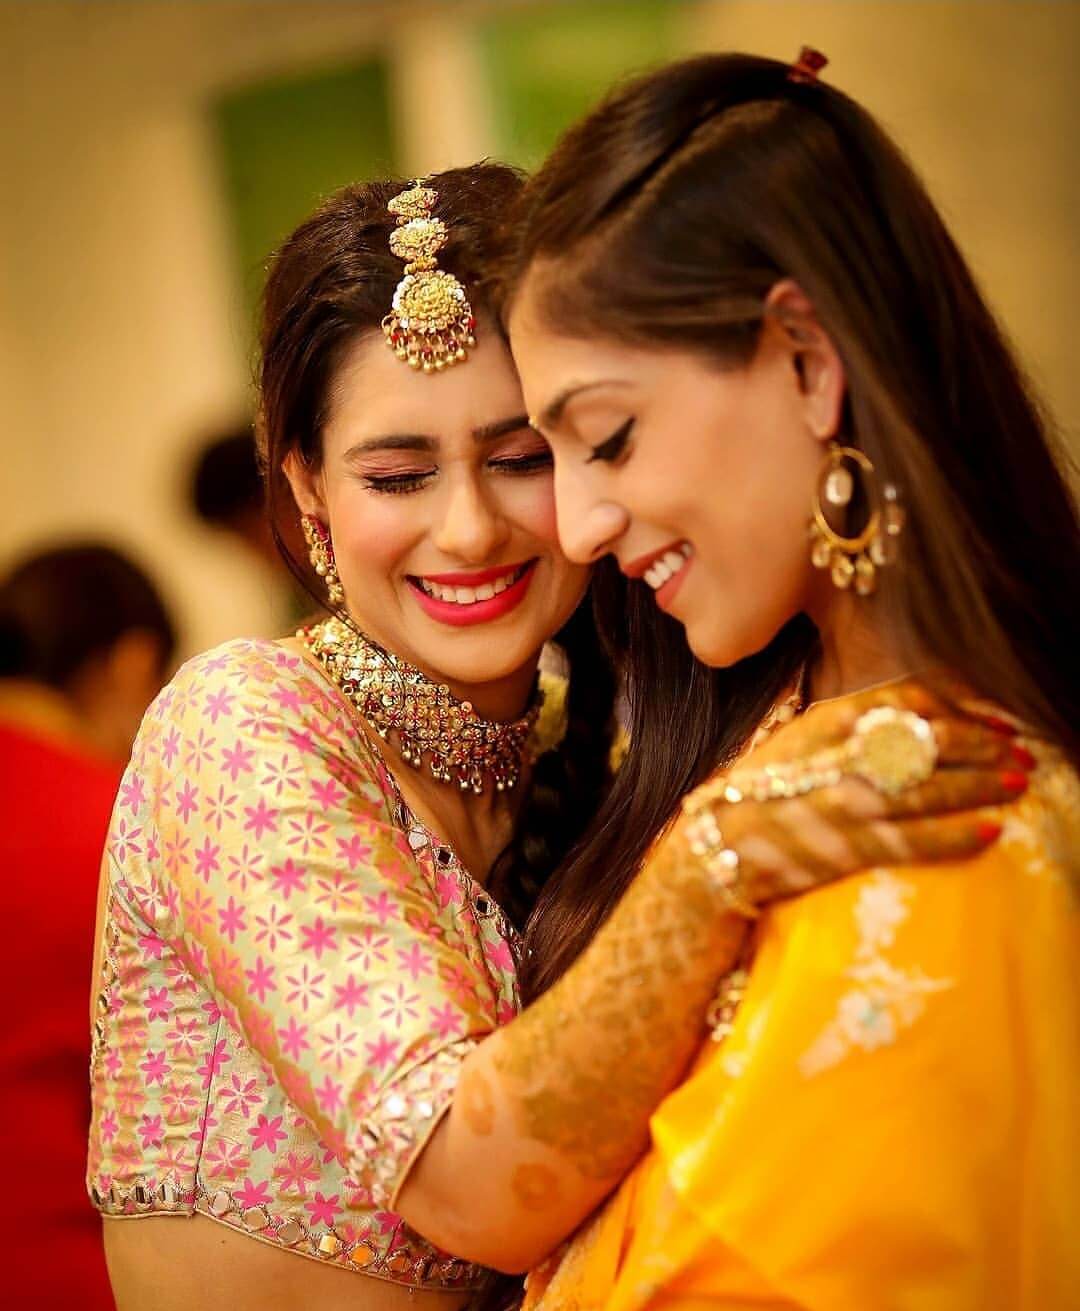 16 Adorable Pictures Of Real Brothers And Sisters At Indian Weddings